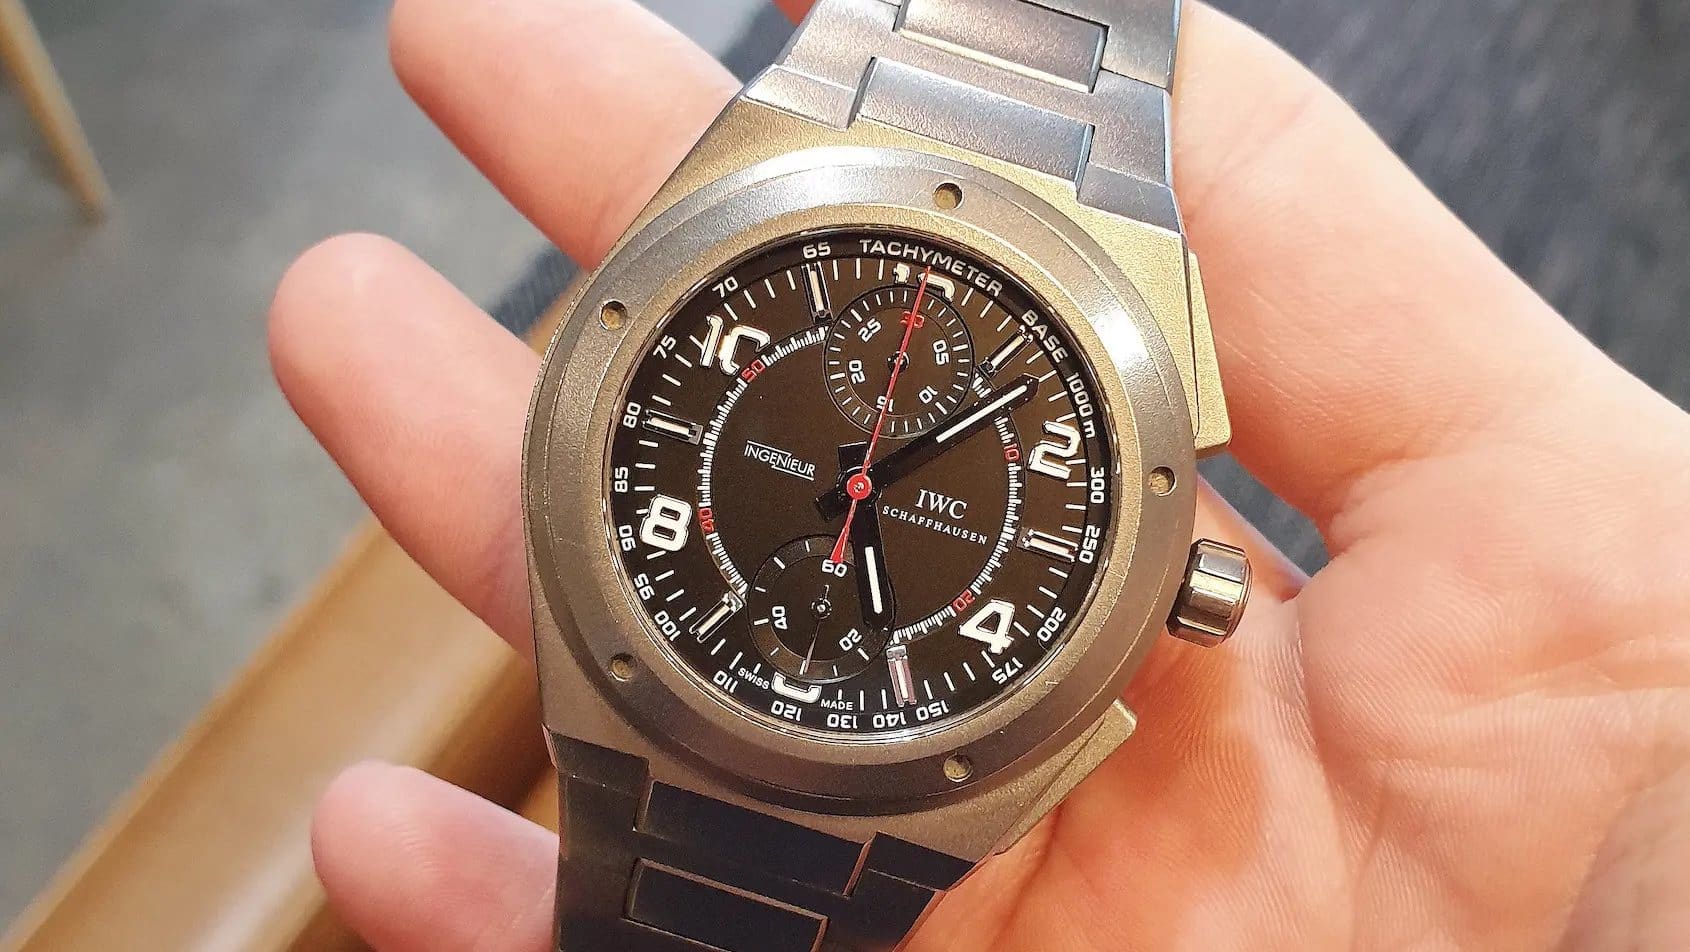 Engineering a classic: The history of IWC’s Ingenieur